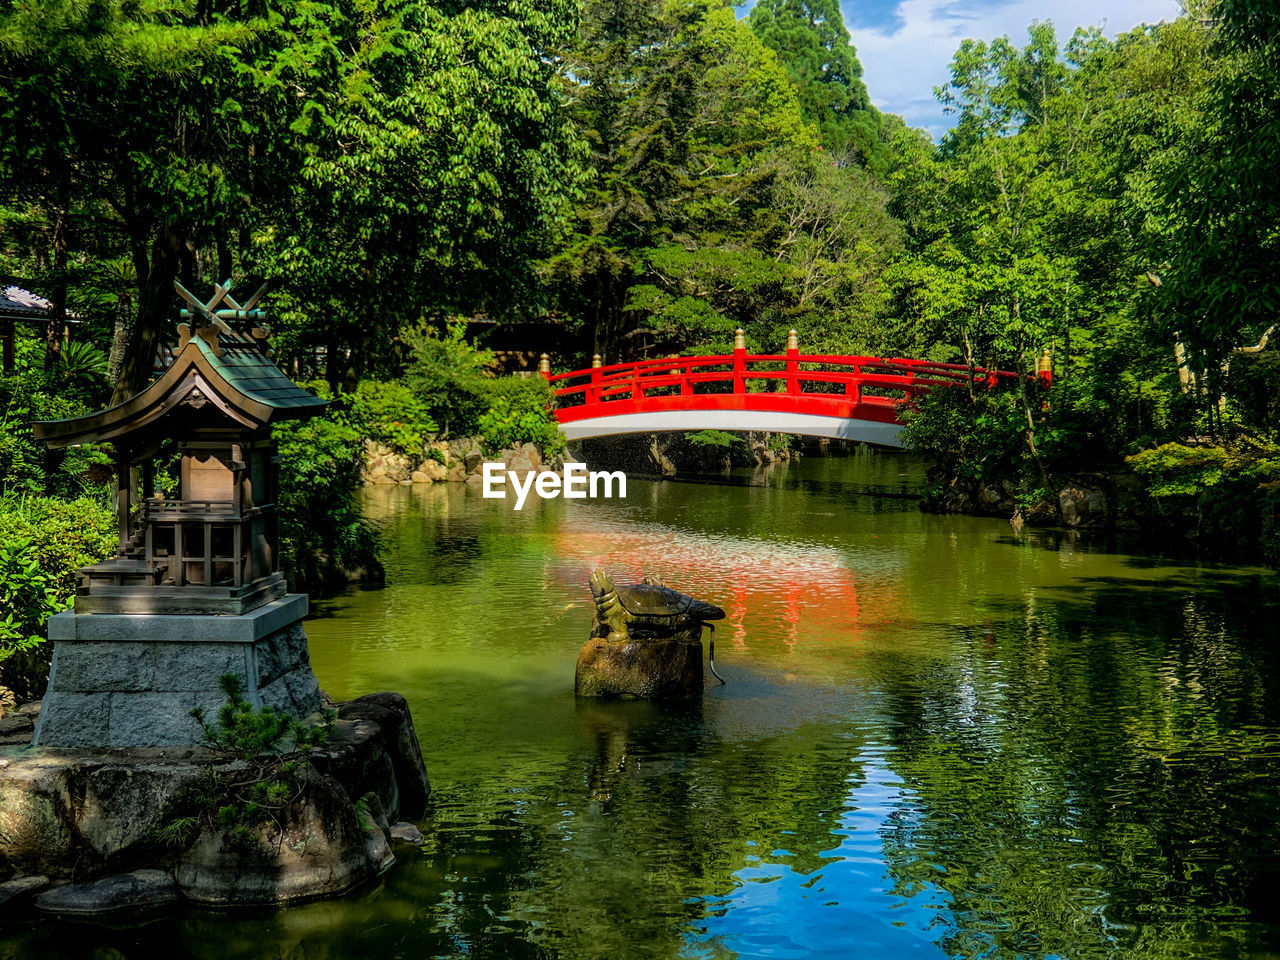 water, tree, plant, reflection, architecture, nature, garden, built structure, lake, flower, park, green, bridge, no people, autumn, beauty in nature, tranquility, travel destinations, temple - building, religion, japanese garden, building exterior, day, outdoors, growth, building, botanical garden, tradition, travel, body of water, formal garden, belief, waterfront, tourism, culture, tranquil scene, foliage, lush foliage, forest, place of worship, pagoda, sky, scenics - nature, jungle